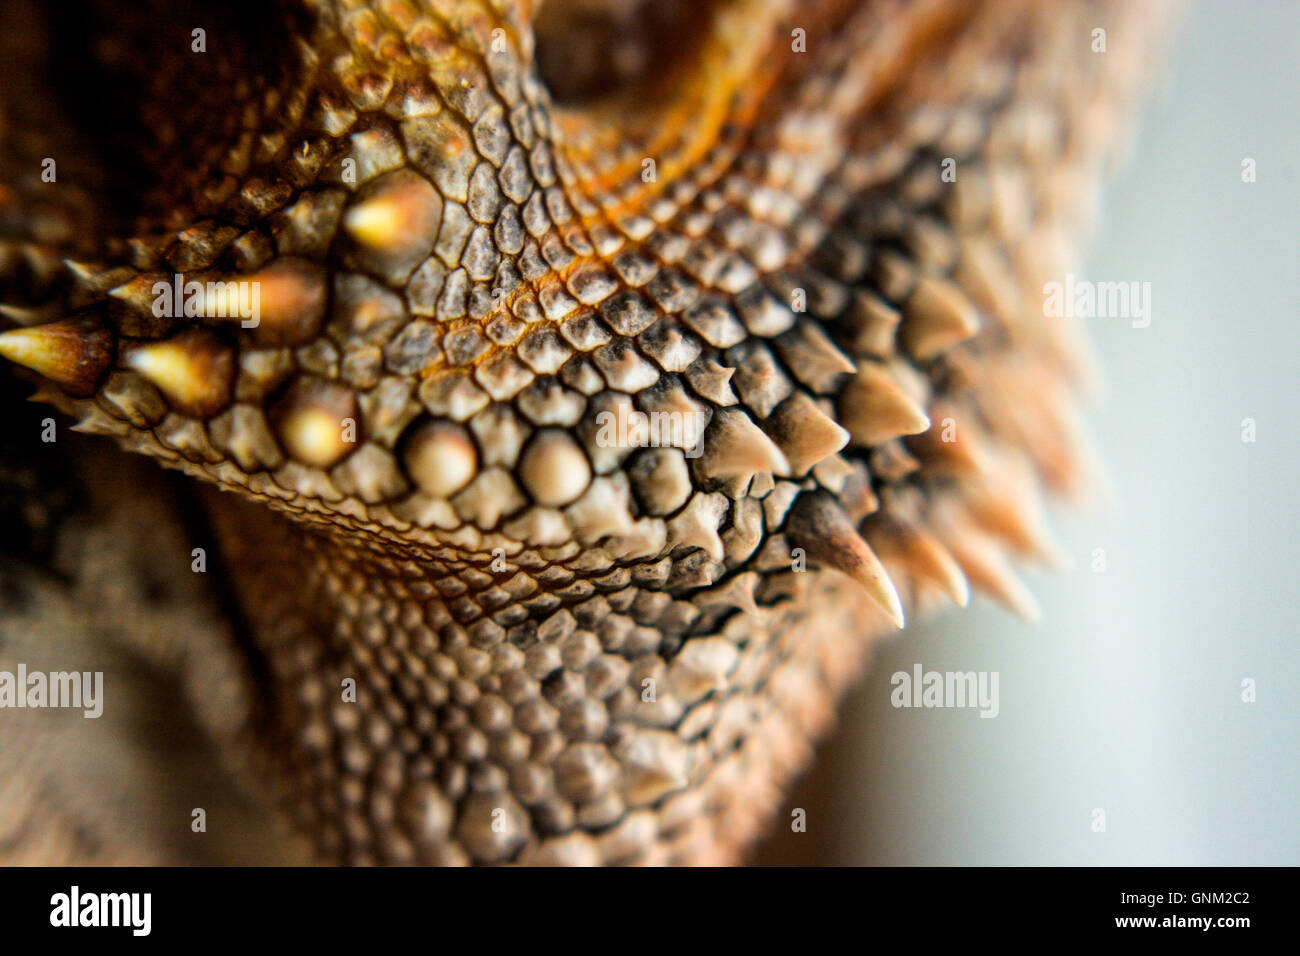 Macro Shot of the Scales of a Bearded Dragon Stock Photo